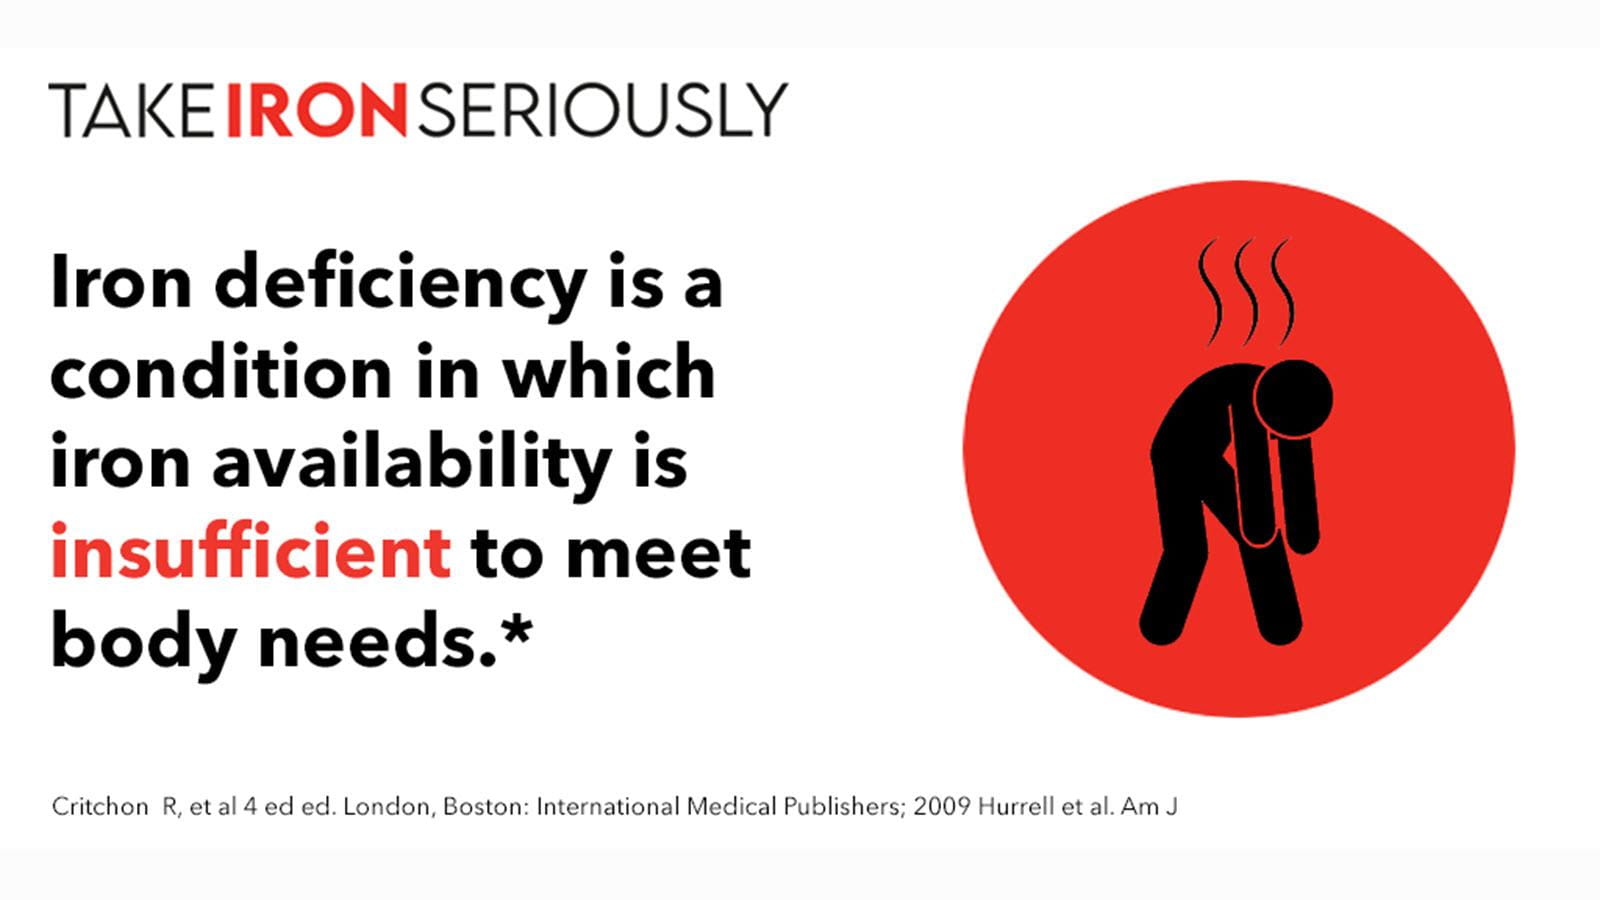 Iron deficiency is a condition in which iron availability is insufficient to meet body needs.